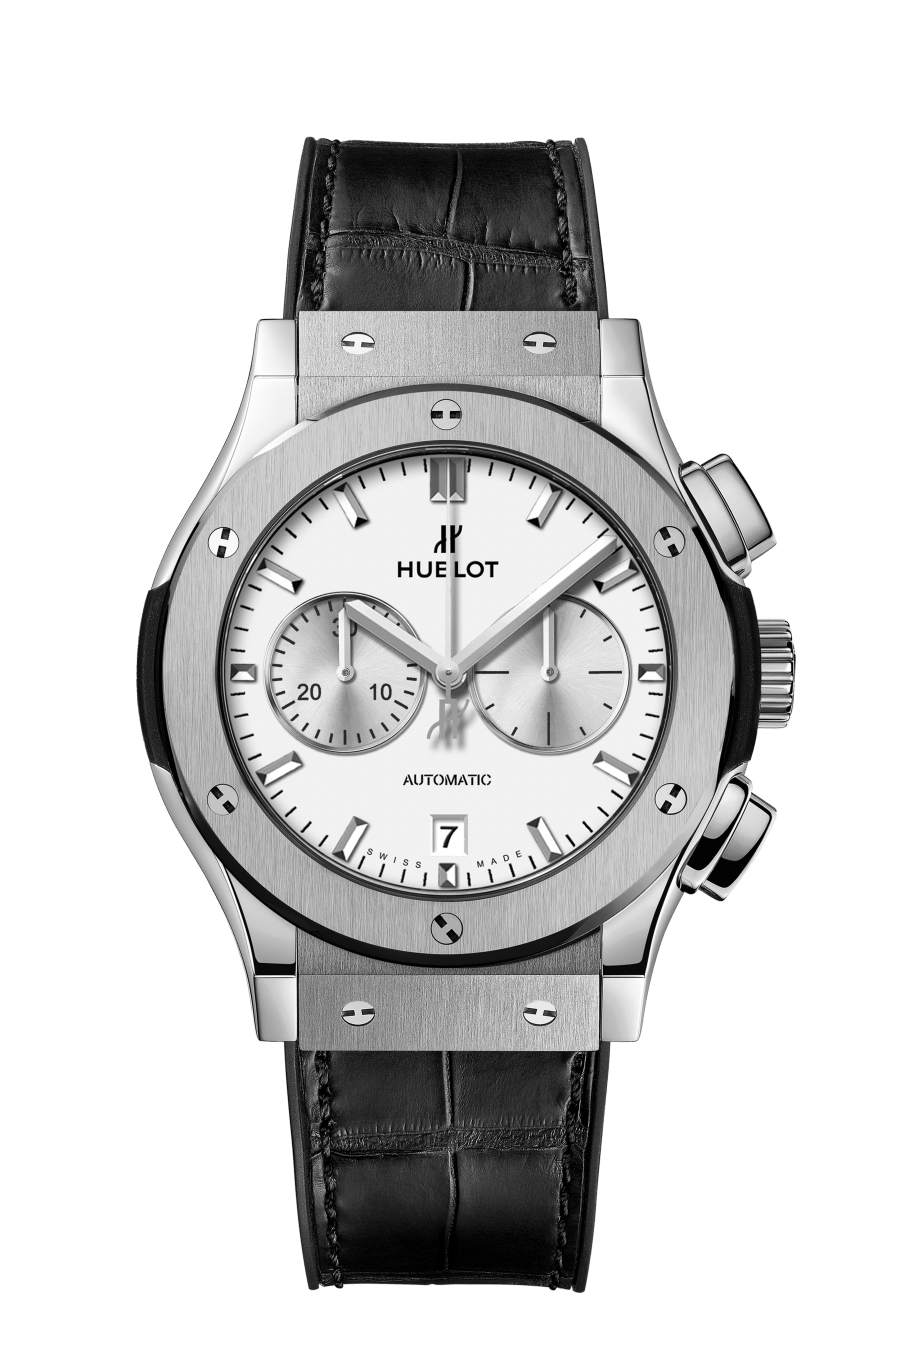 Hublot Classic Fusion Chronograph with Opalin Dial in Titanium 42mm